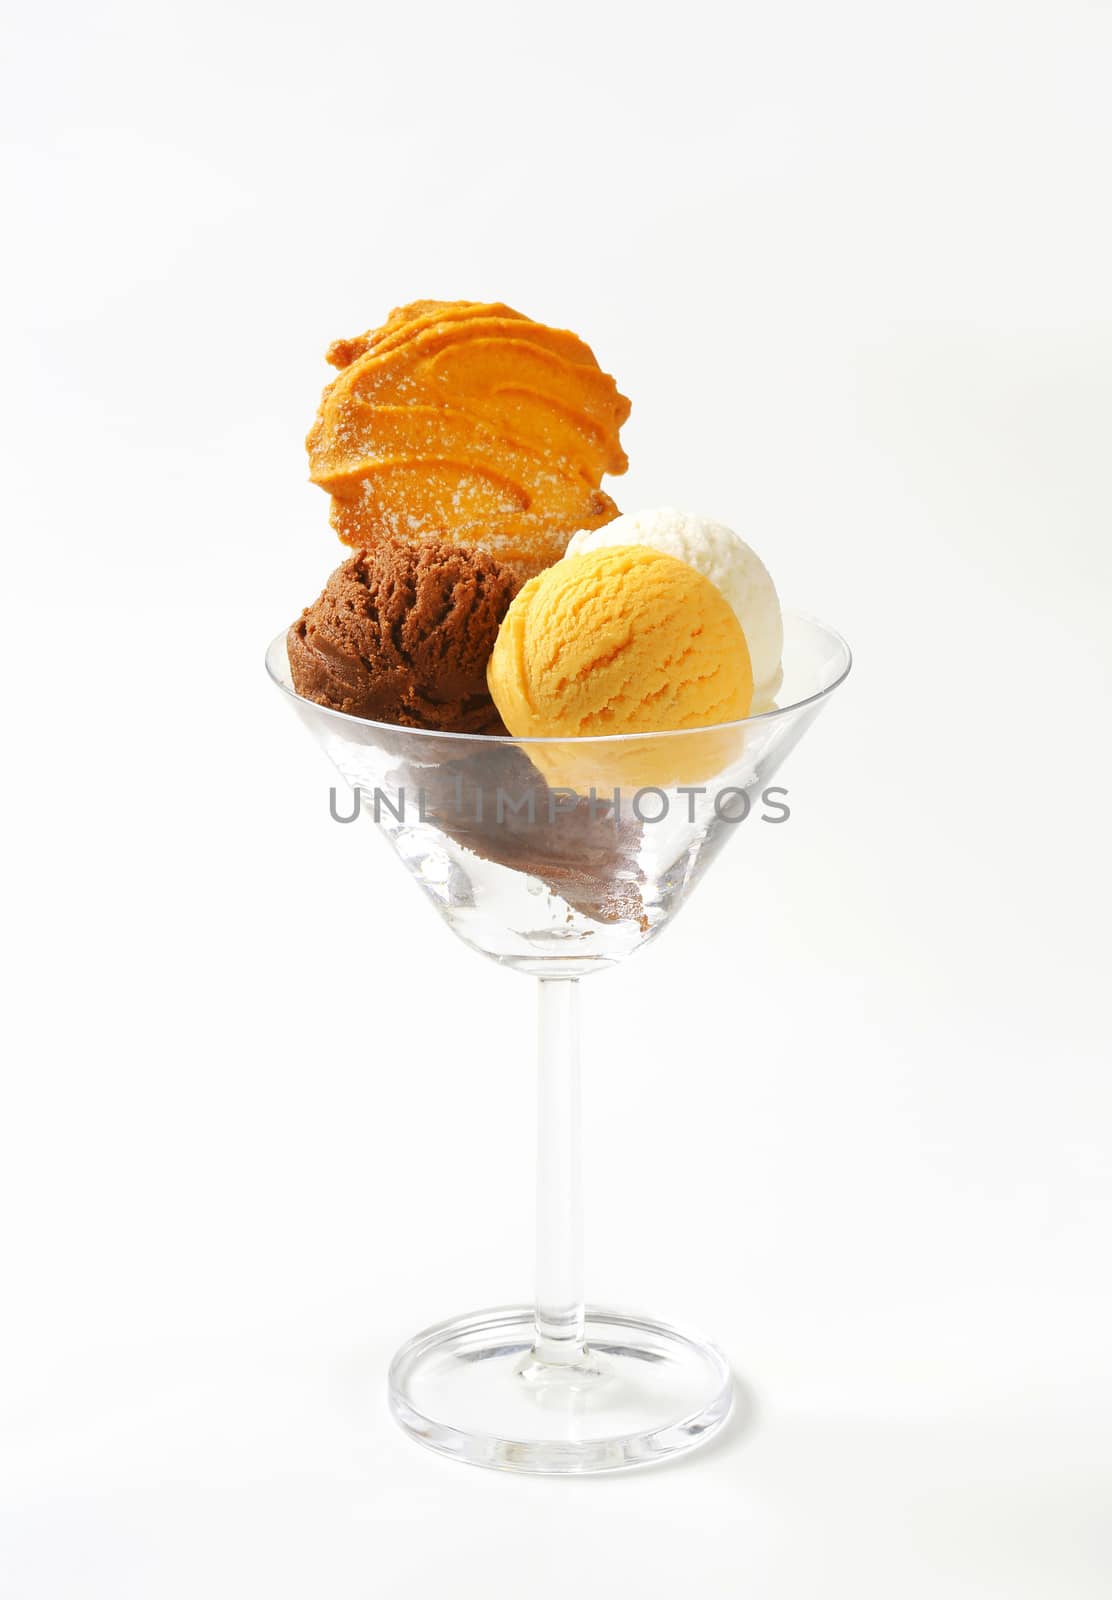 Three scoops of ice cream in glass decorated with Spritz cookie